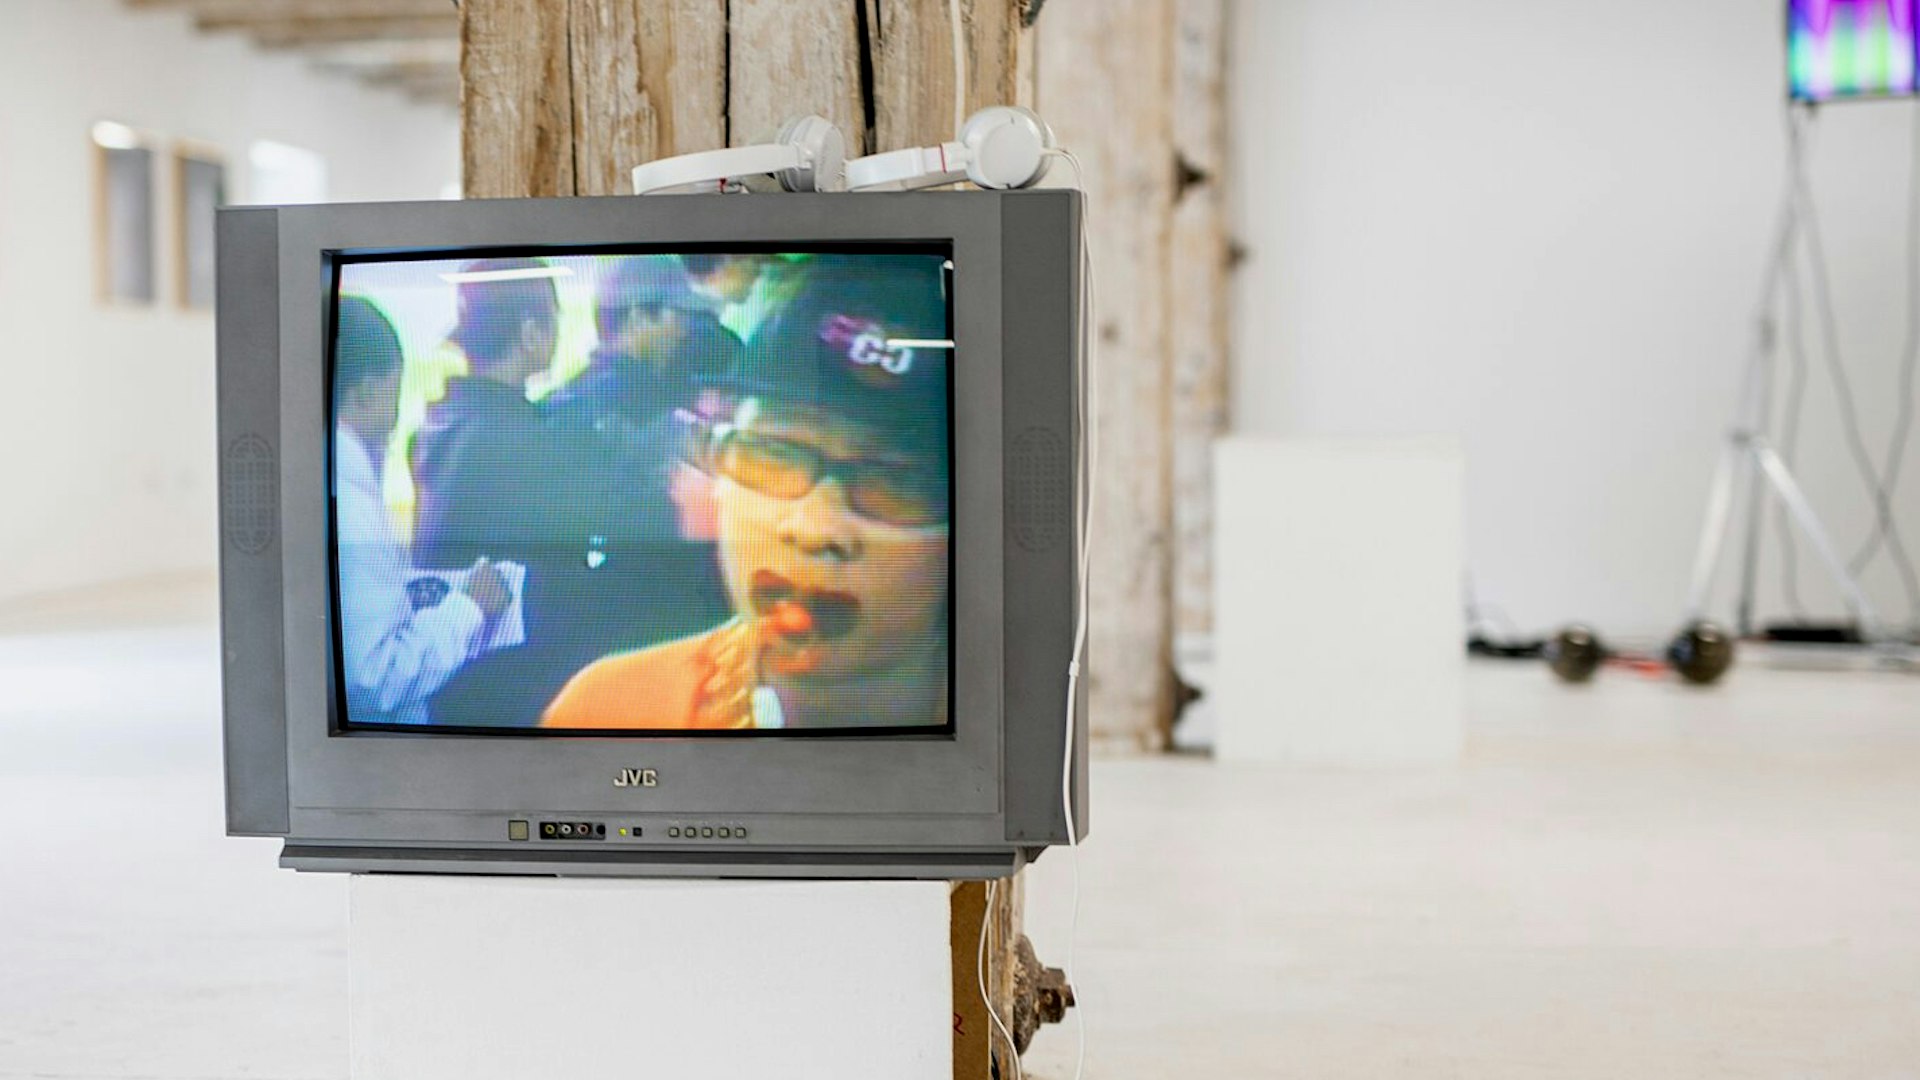 Installation view of a television with a person on the screen and headphones on top, Techno Worlds, Budapest